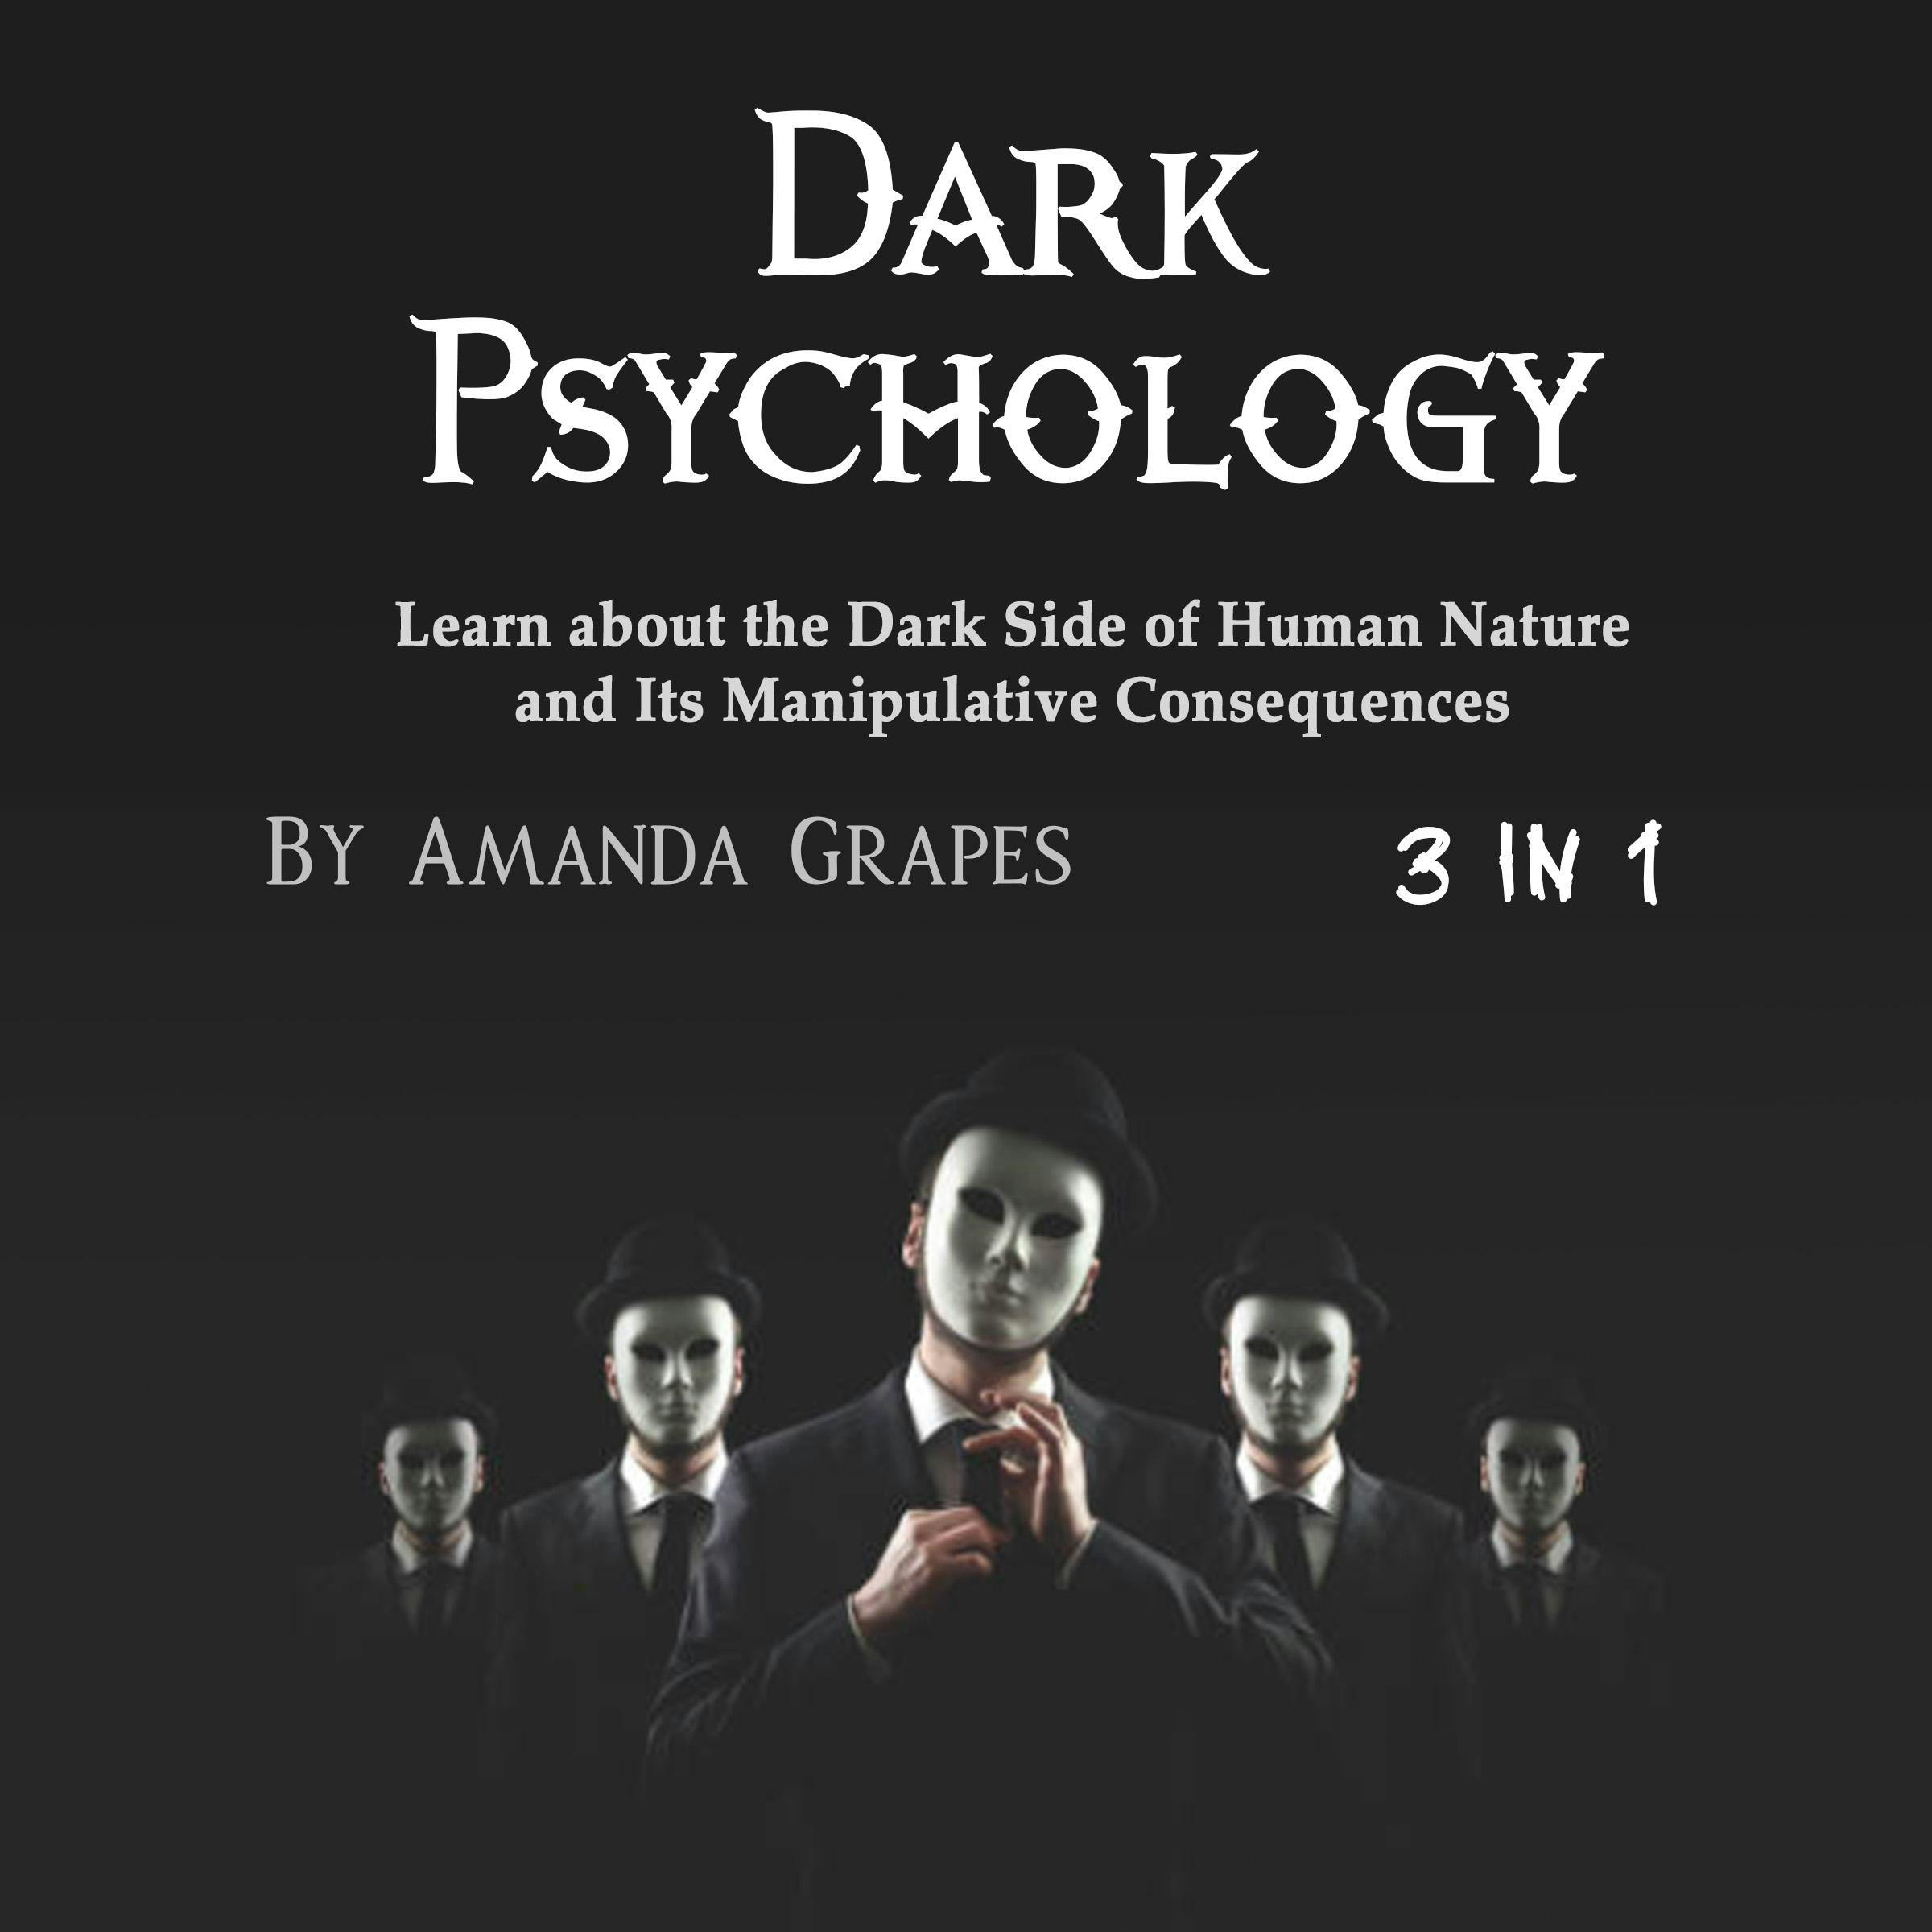 Dark Psychology: Learn about the Dark Side of Human Nature and Its Manipulative Consequences - Amanda Grapes